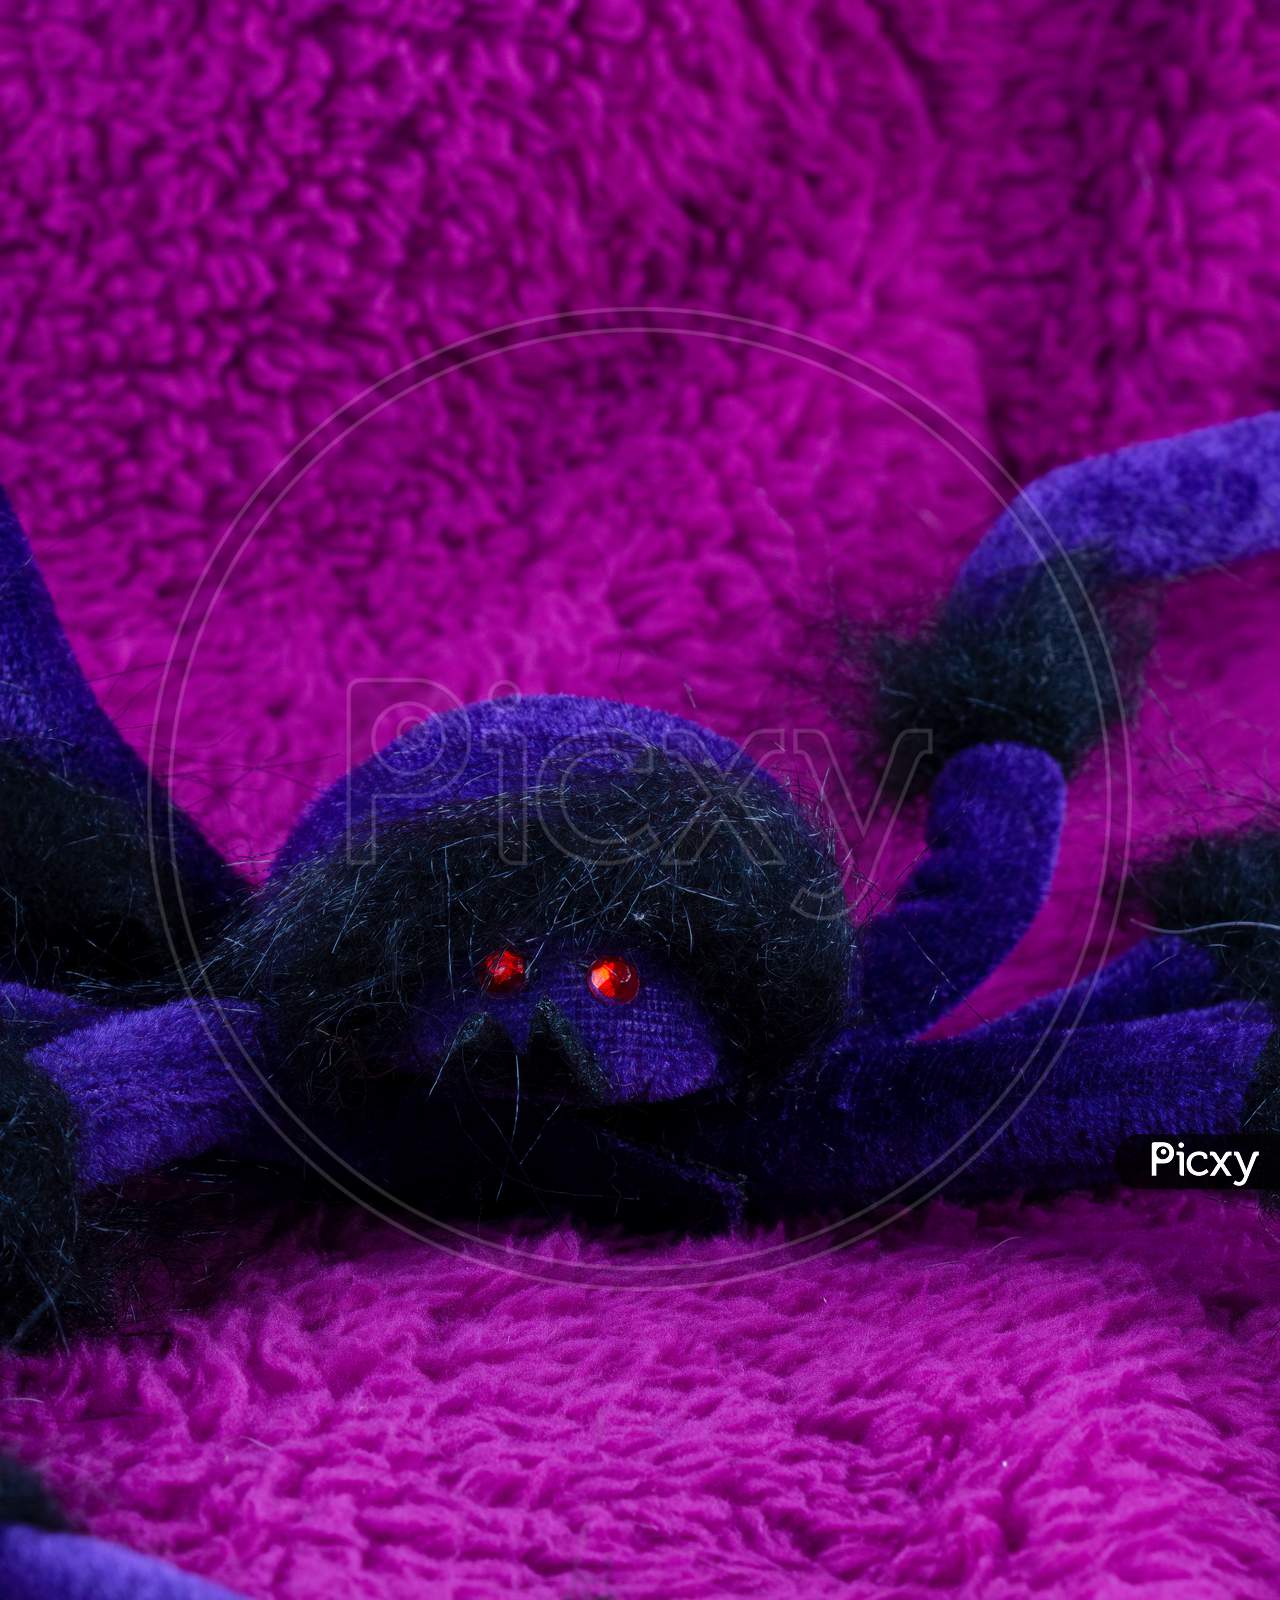 Scary Purple Hairy Spider On Fluffy Magenta Backdrop